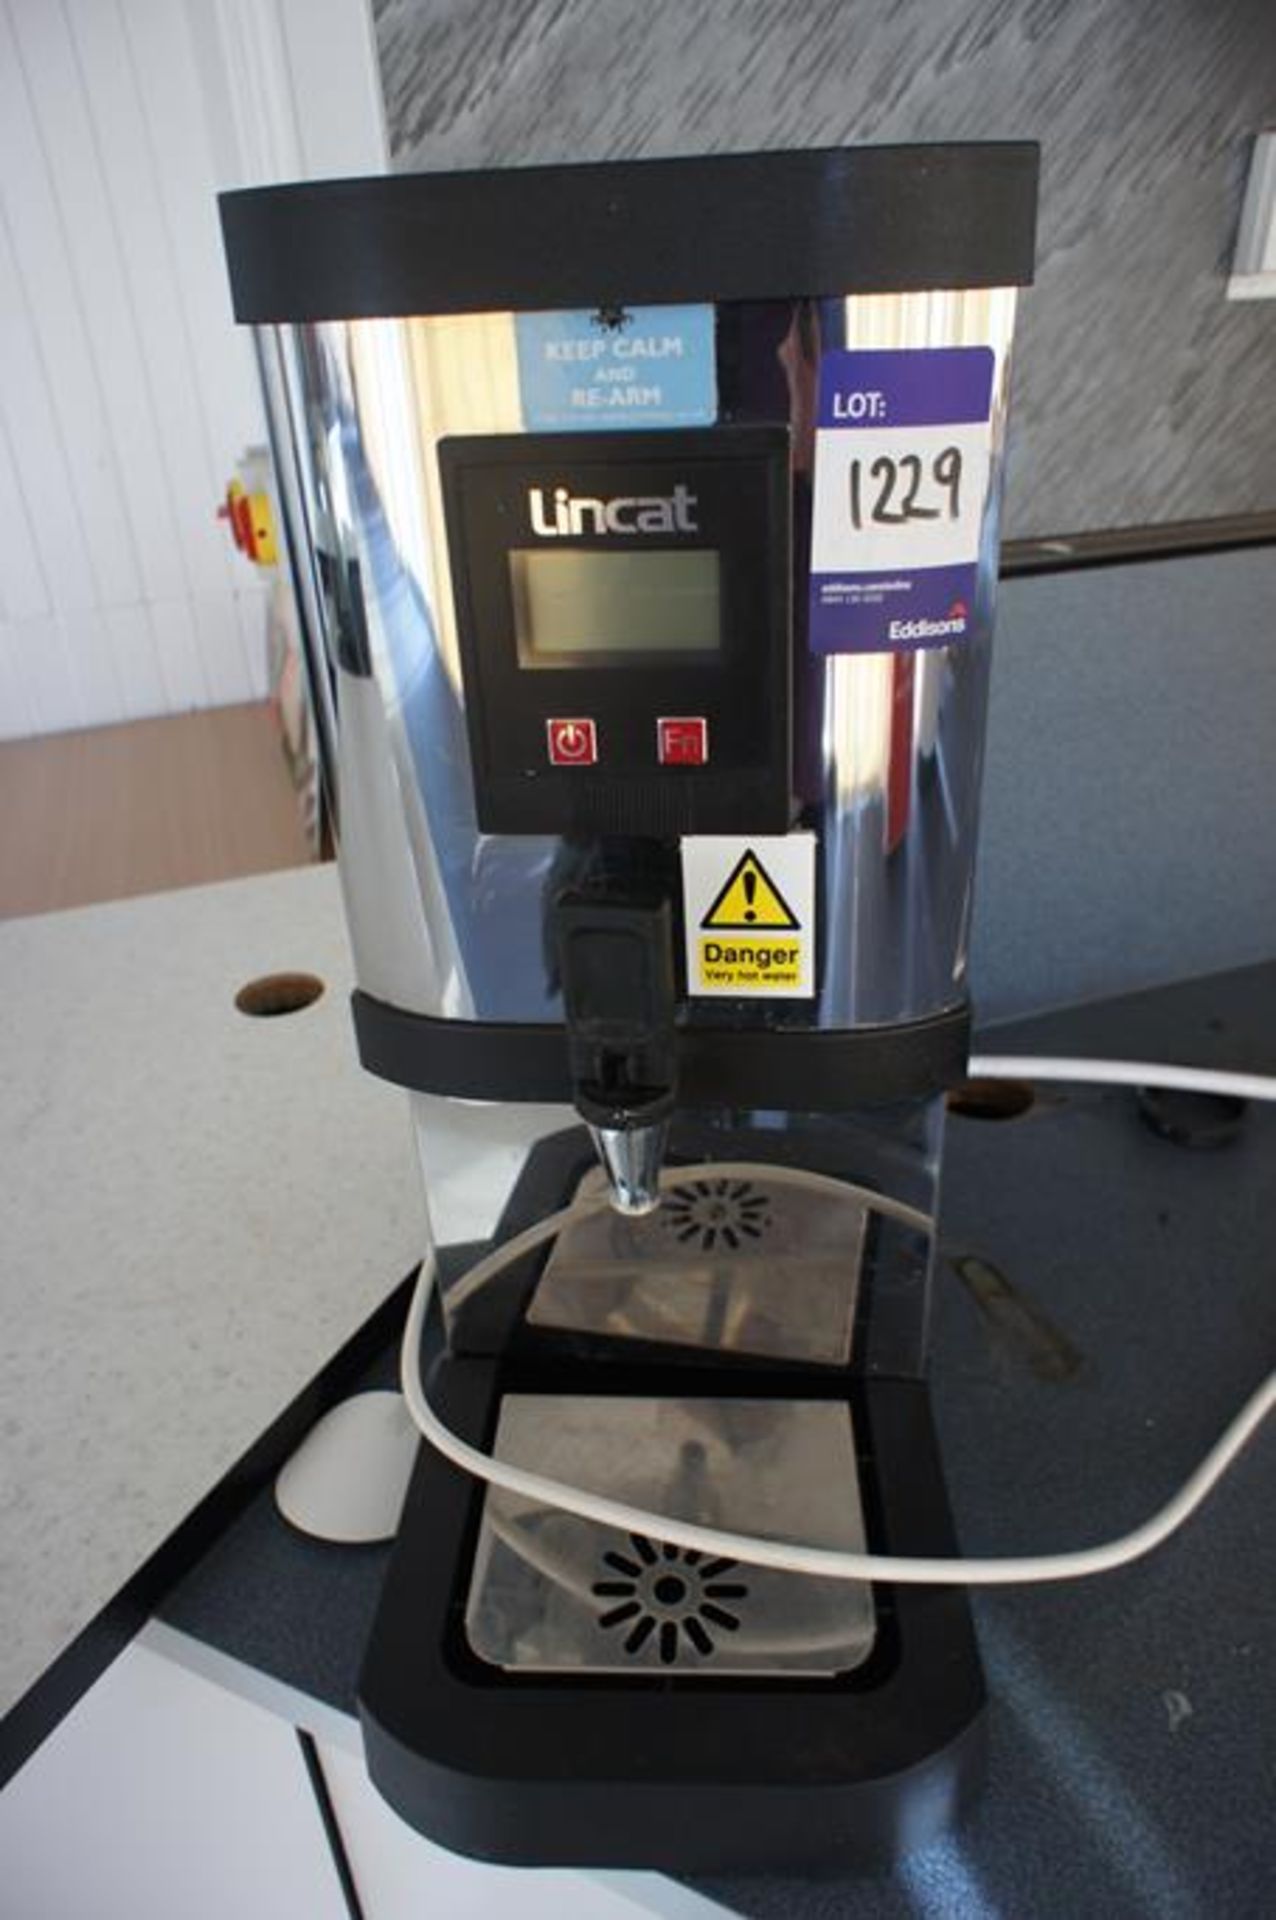 * Lincat Hot Water Boiler 240V, 32Amp Photographs are provided for example purposes only and do